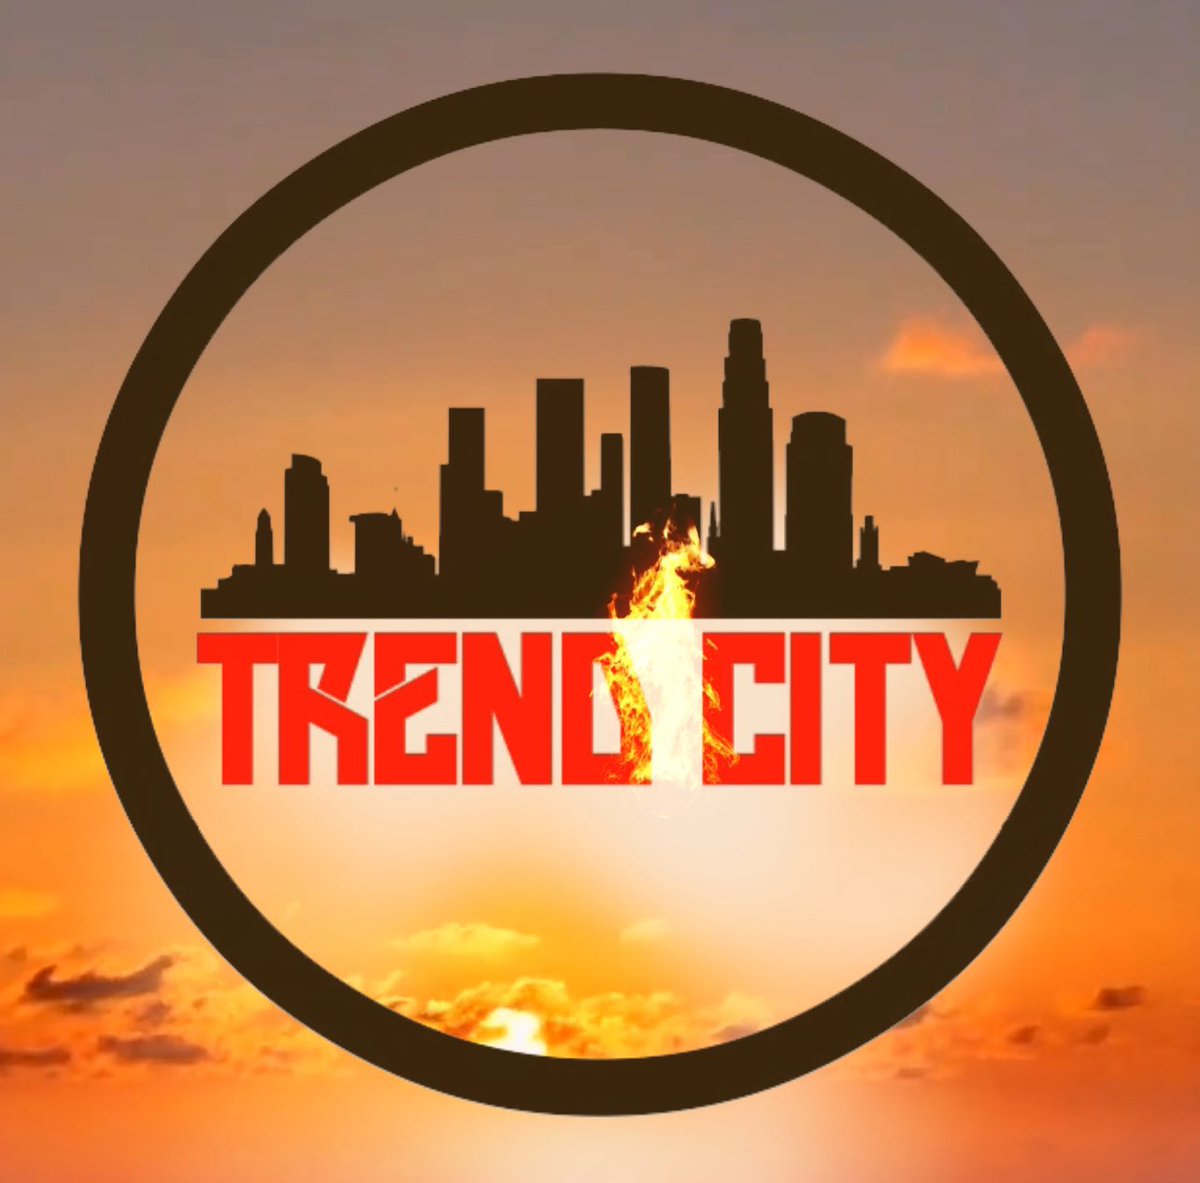 You can Tune in now to listen 🎧 to our LIVE Show!!!📻📲💥 We’re Live!!!!📻🎵🔥 💥TrendCityRadio.com💥 #Live #Show #TrendCityRadio #located #LosAngeles #California #Vote #Your #Favorite #Artist #LiveShow #Download #App #Spotify #Youtube #AppleMusic #SoundCloud